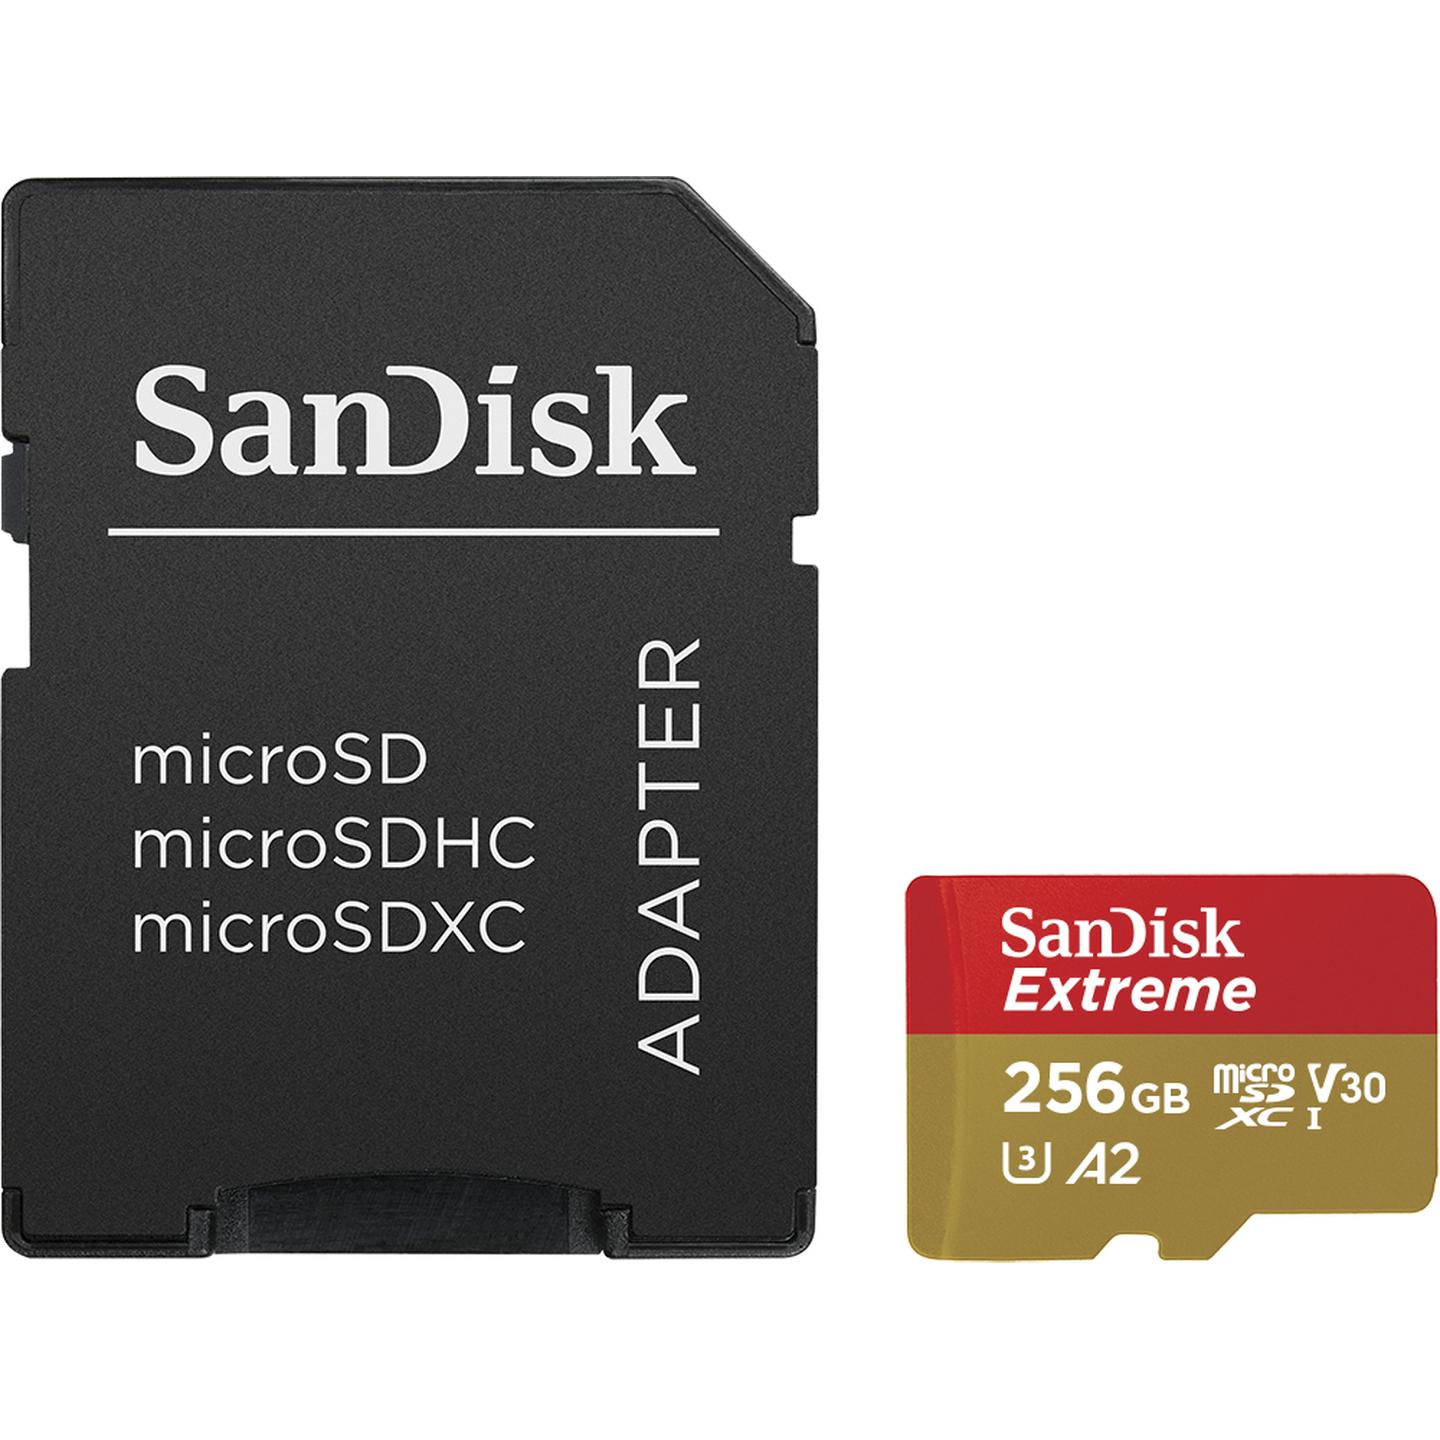 Sandisk 256GB High Extreme microSDXC Class 10 Reads 190MB/S Writes 130MB/S 